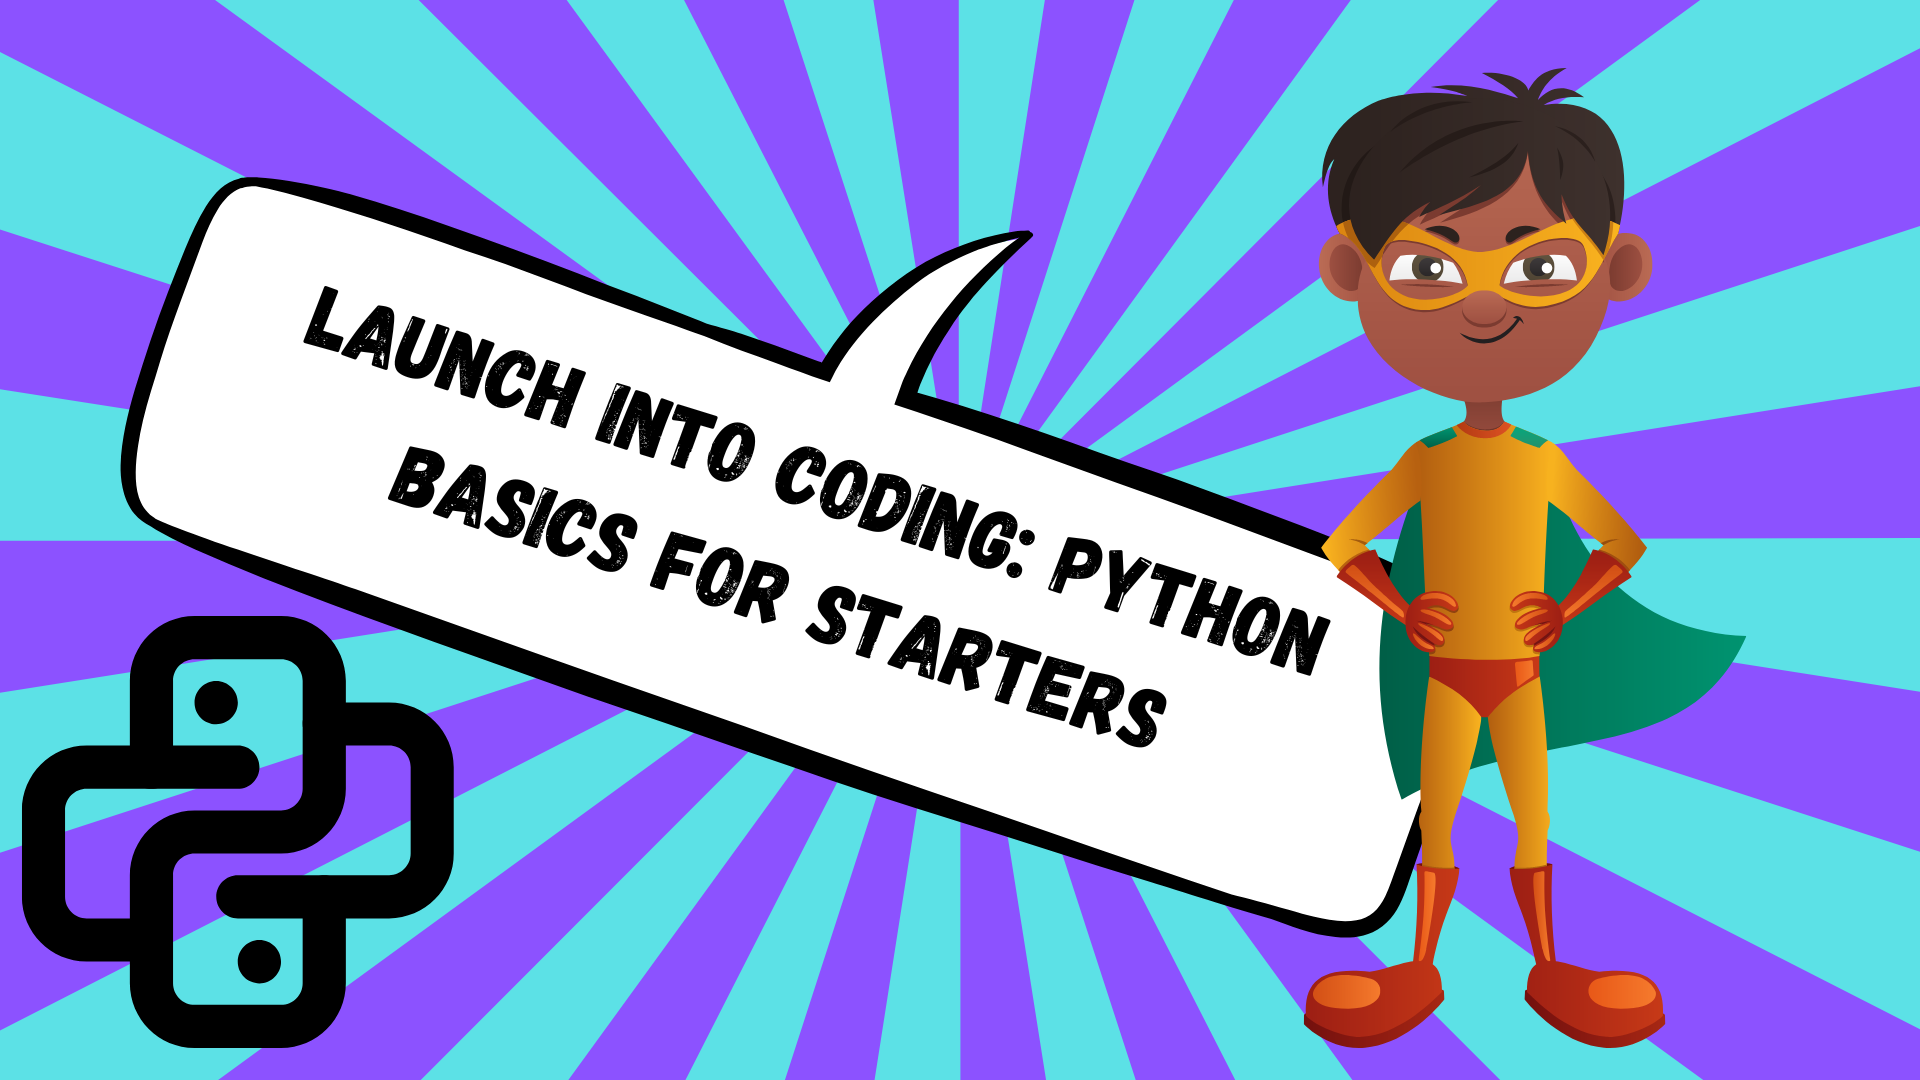 Launch into Coding: Python Basics for Starters